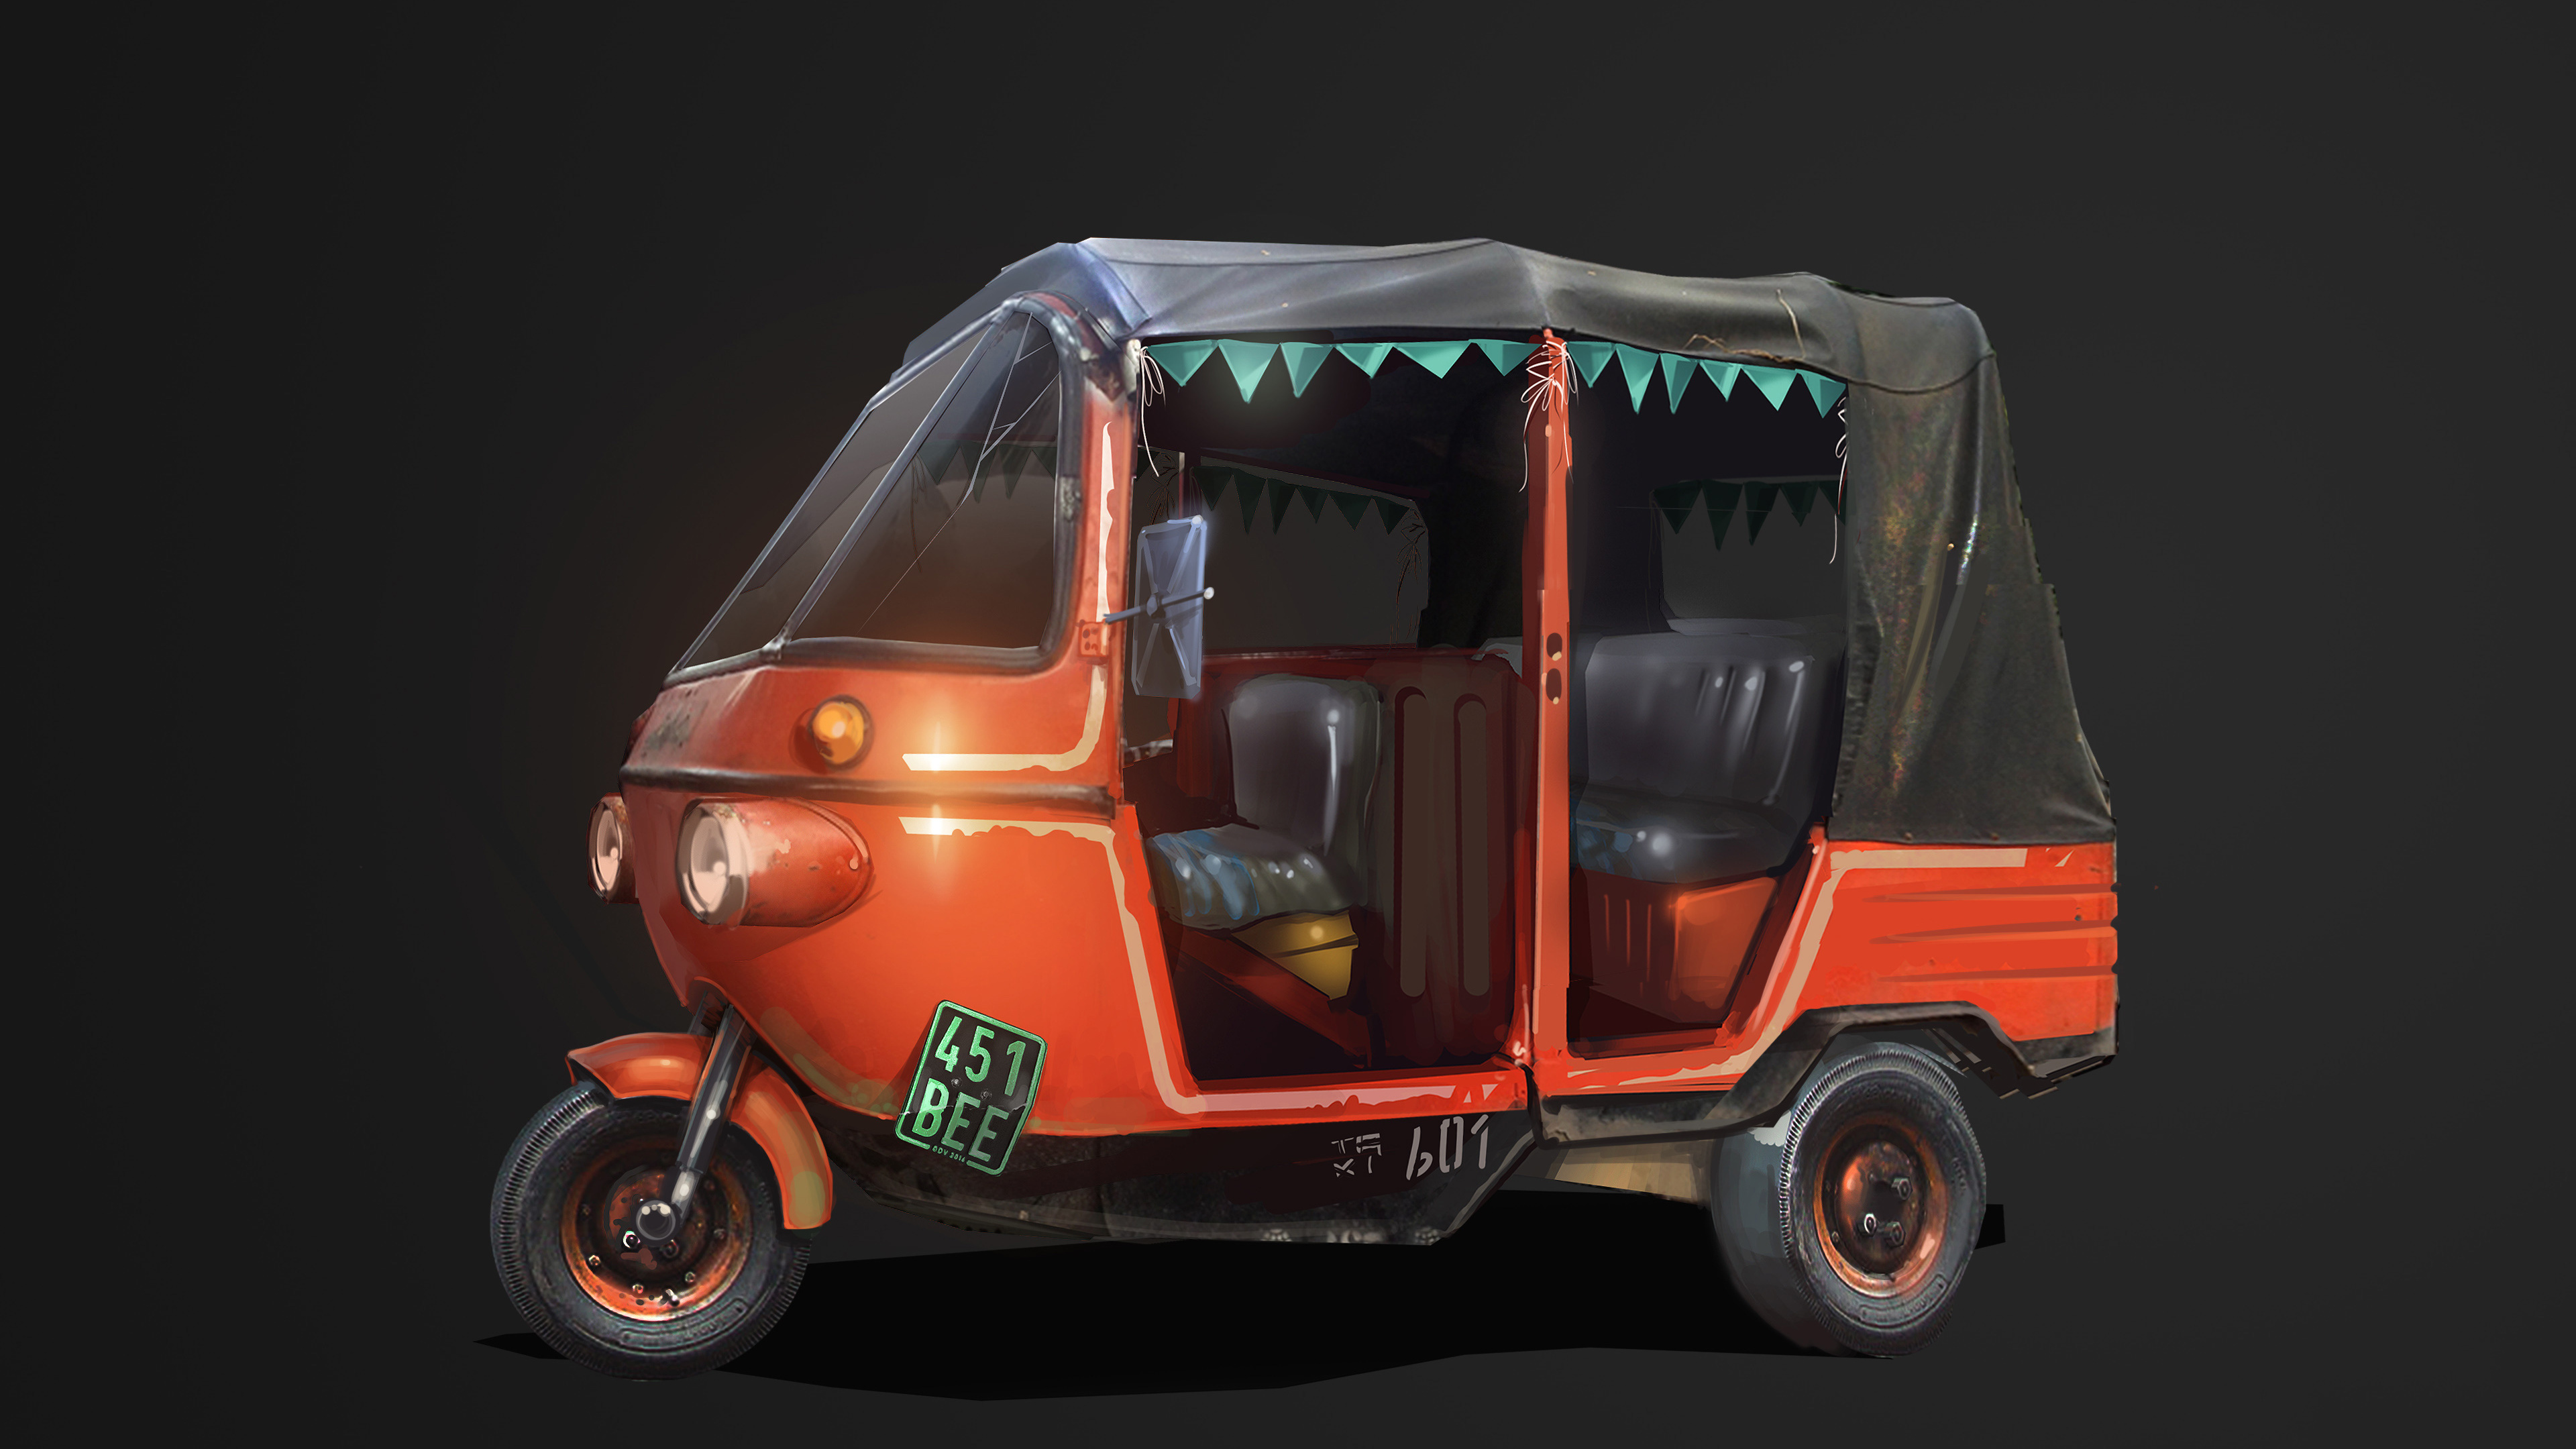 Red and Black Auto Rickshaw. Wallpaper in 3840x2160 Resolution